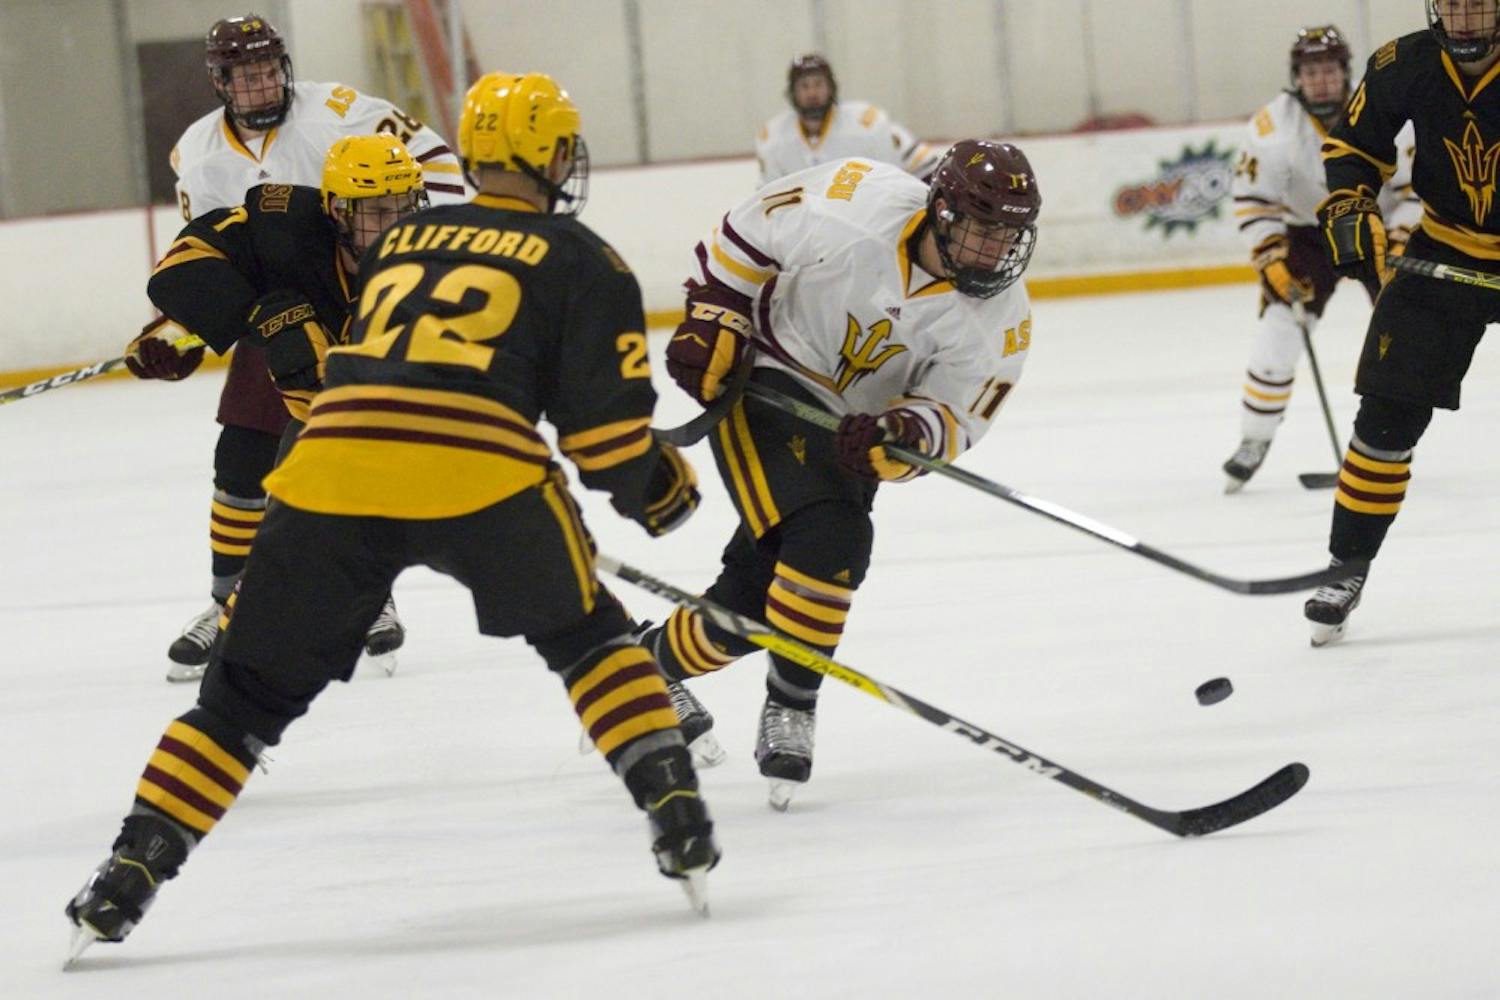 ASU freshman left winger Jack Rowe (11, maroon) controls the puck with sophomore right defender Jake Clifford (22, gold) looking to stop him during the annual Maroon and Gold Scrimmage at Oceanside Ice Arena, in Tempe, Arizona on Saturday, Oct. 1, 2016. The maroon team won 4-3 in overtime.